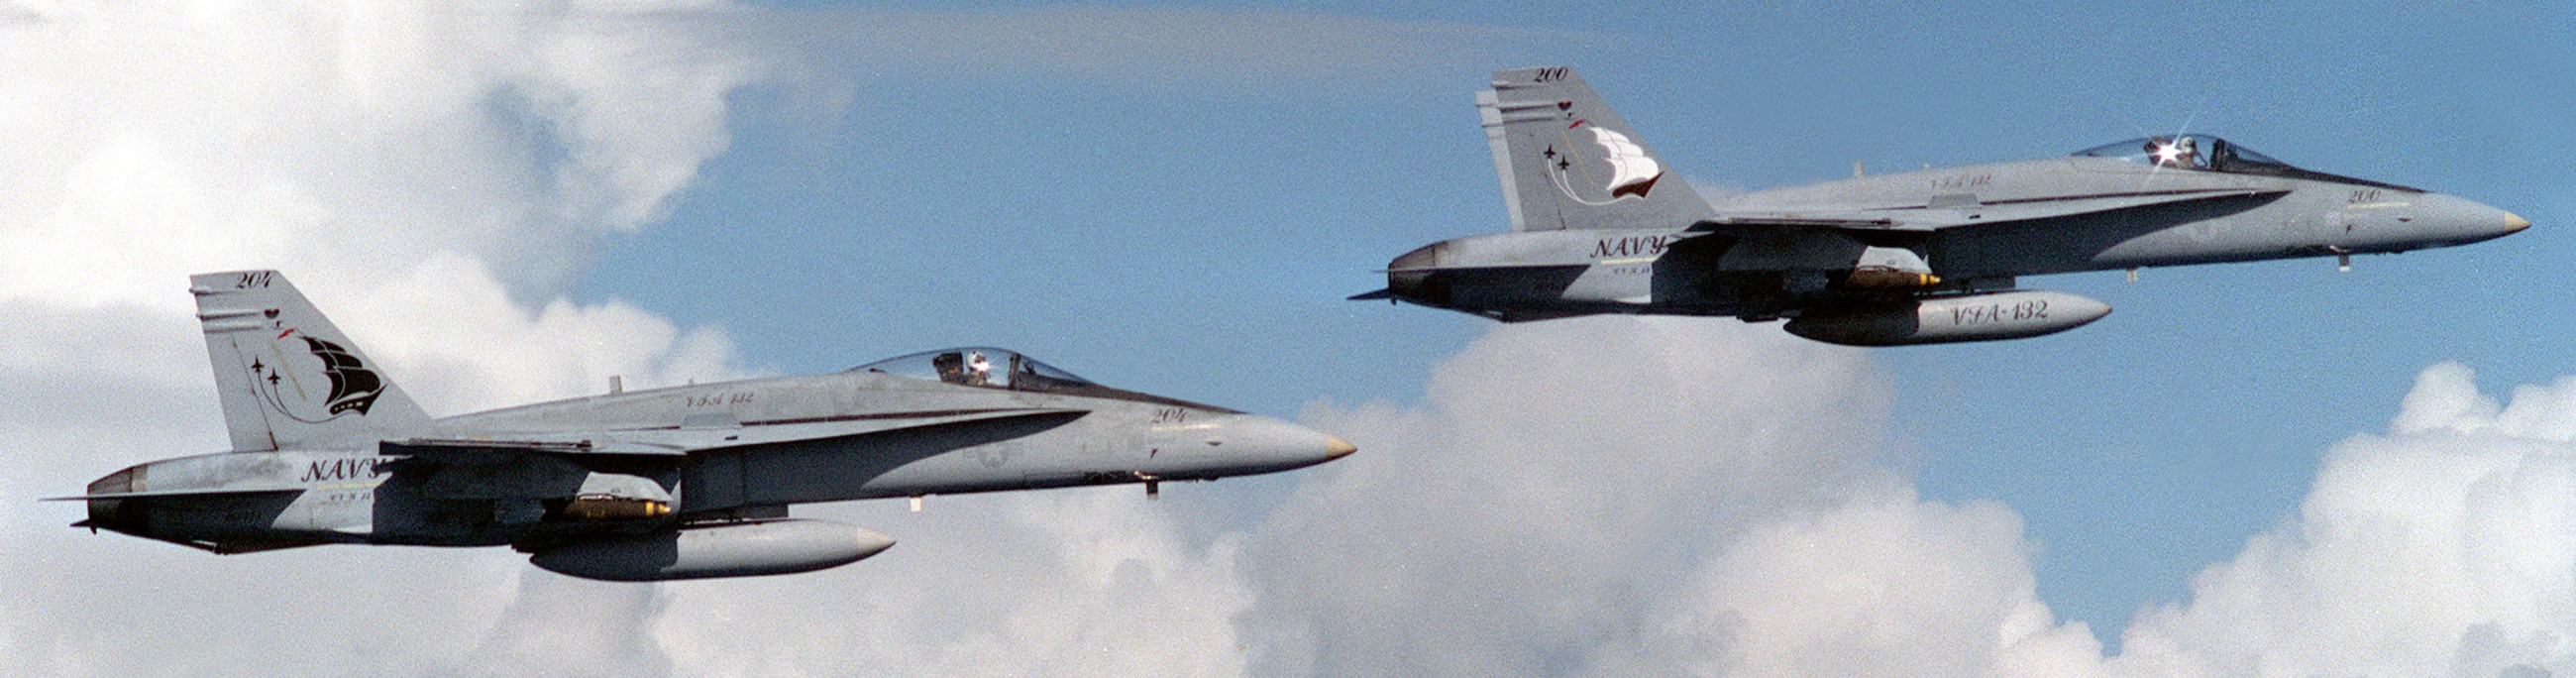 vfa-132 privateers strike fighter squadron f/a-18a hornet cvw-13 uss abraham lincoln cvn-72 1990 20